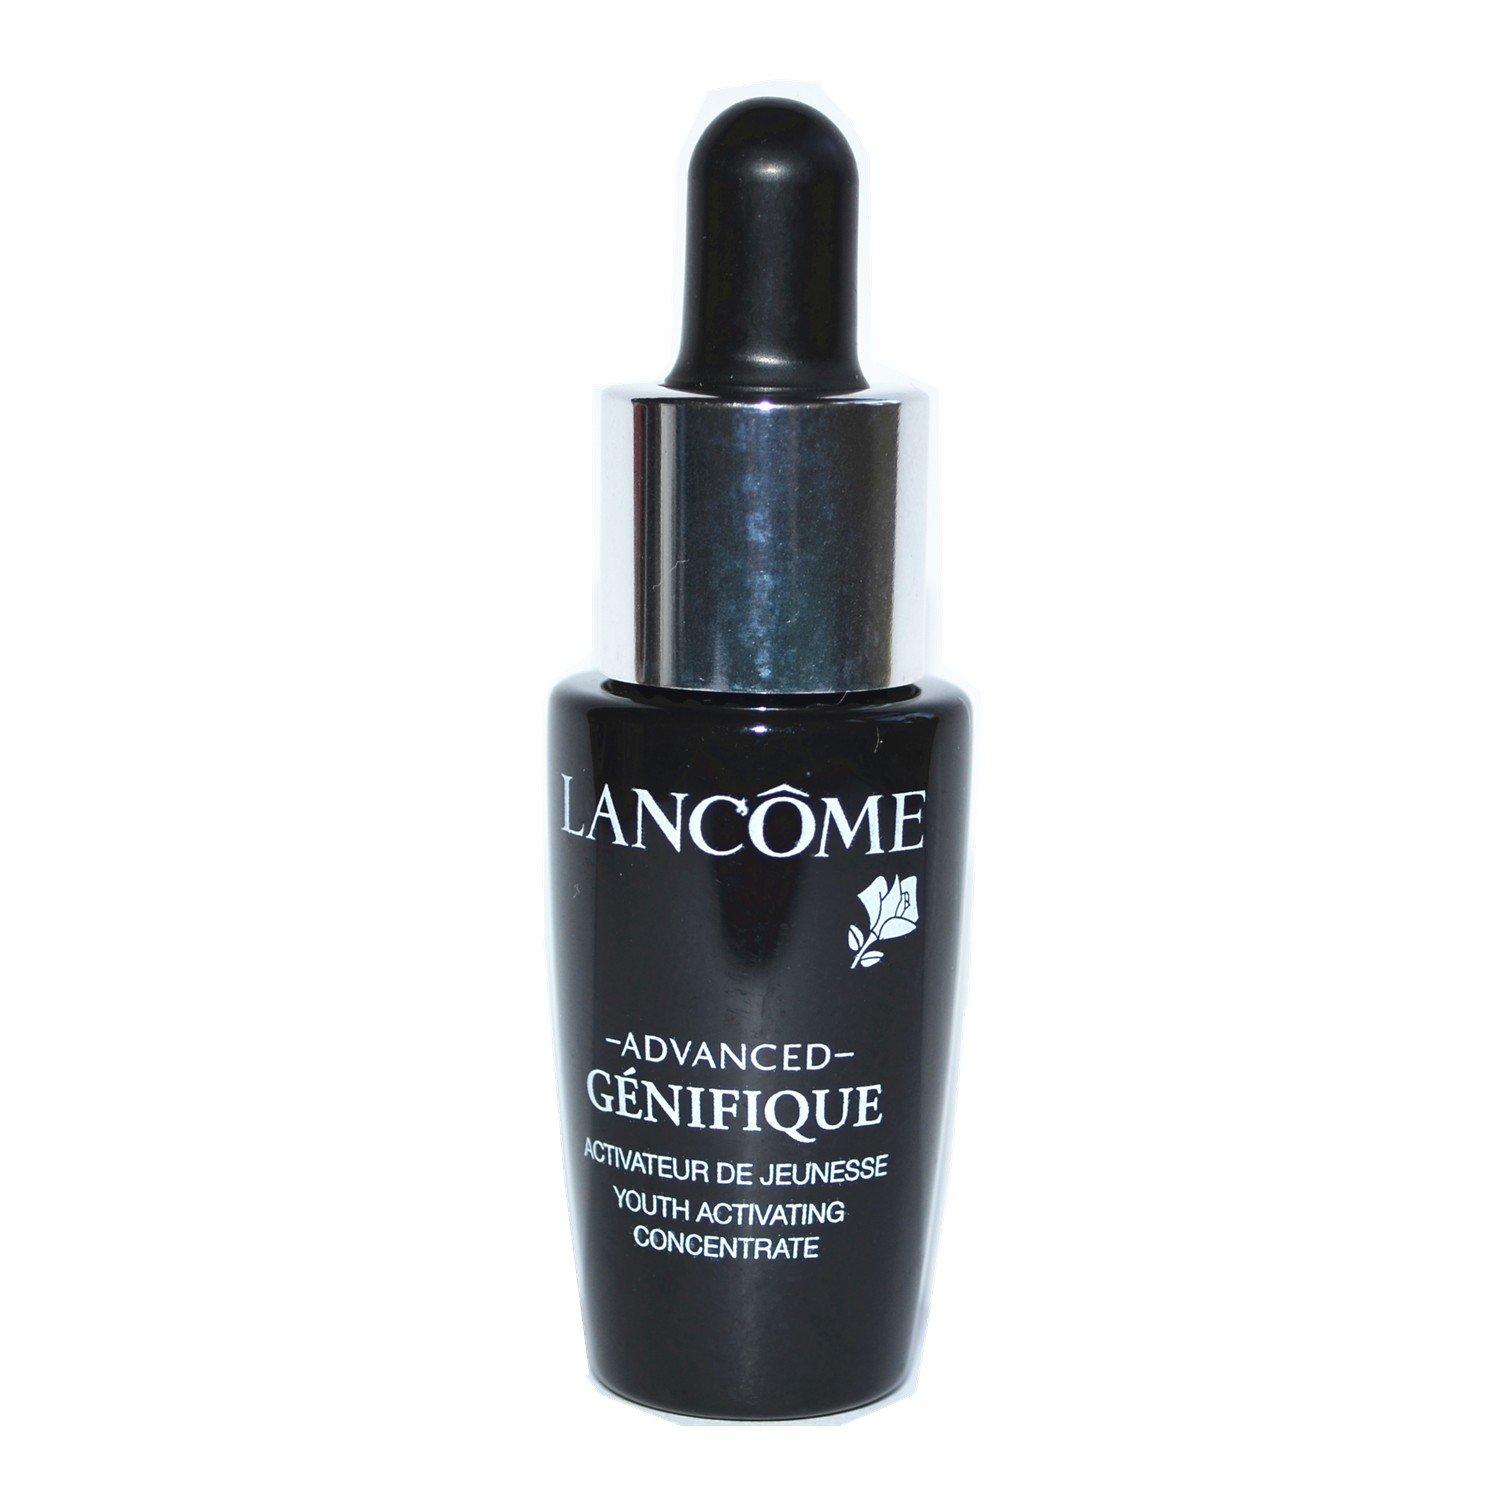 Lancome Advanced Genifique Youth Activating Concentrate Travel